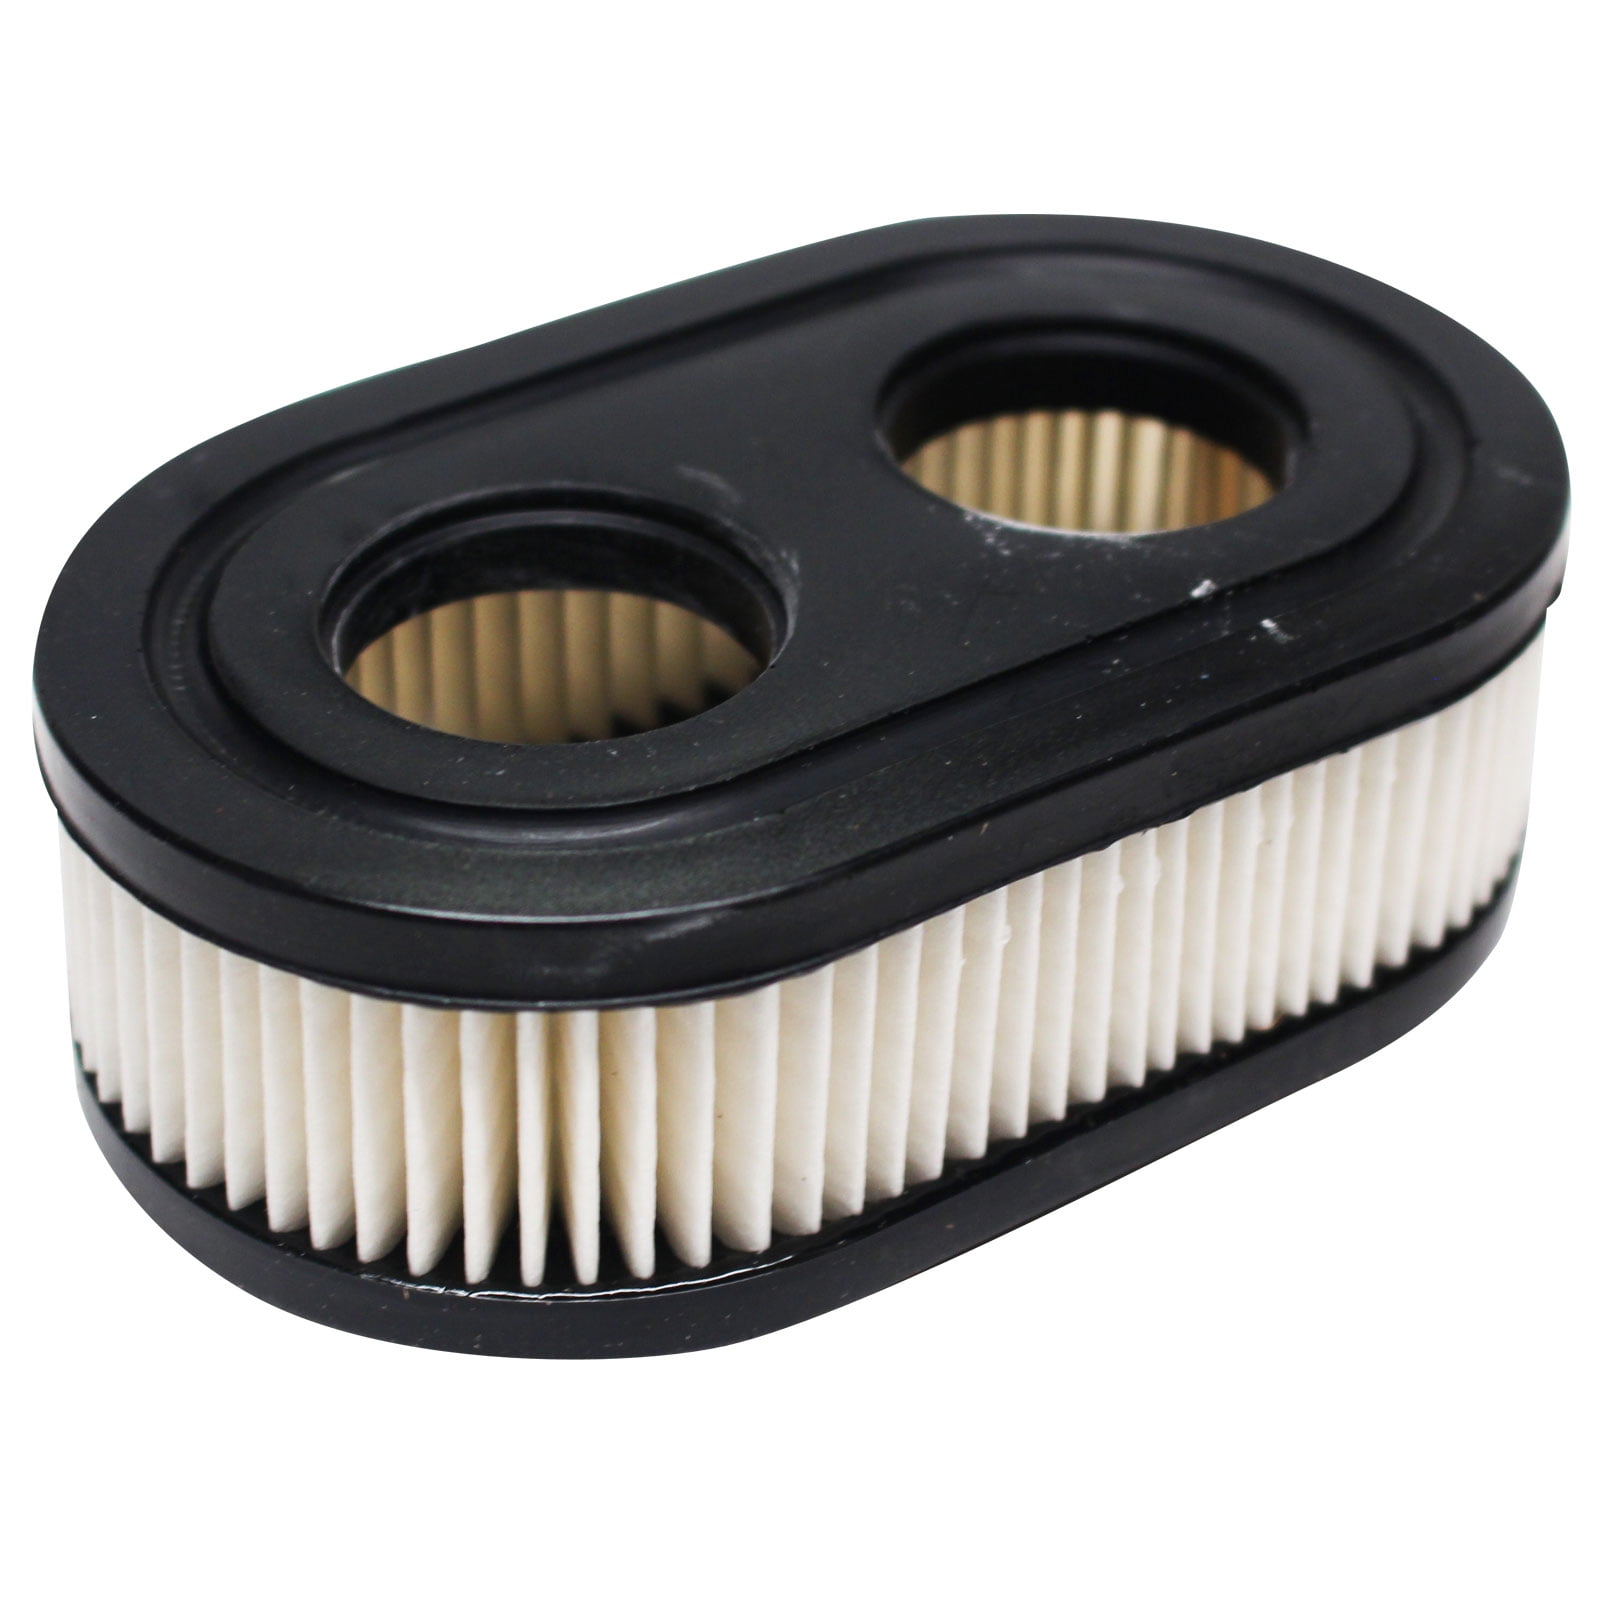 Pre-cleaner for Briggs & Stratton 40 44 Series Engines Air Filter Cartridge 